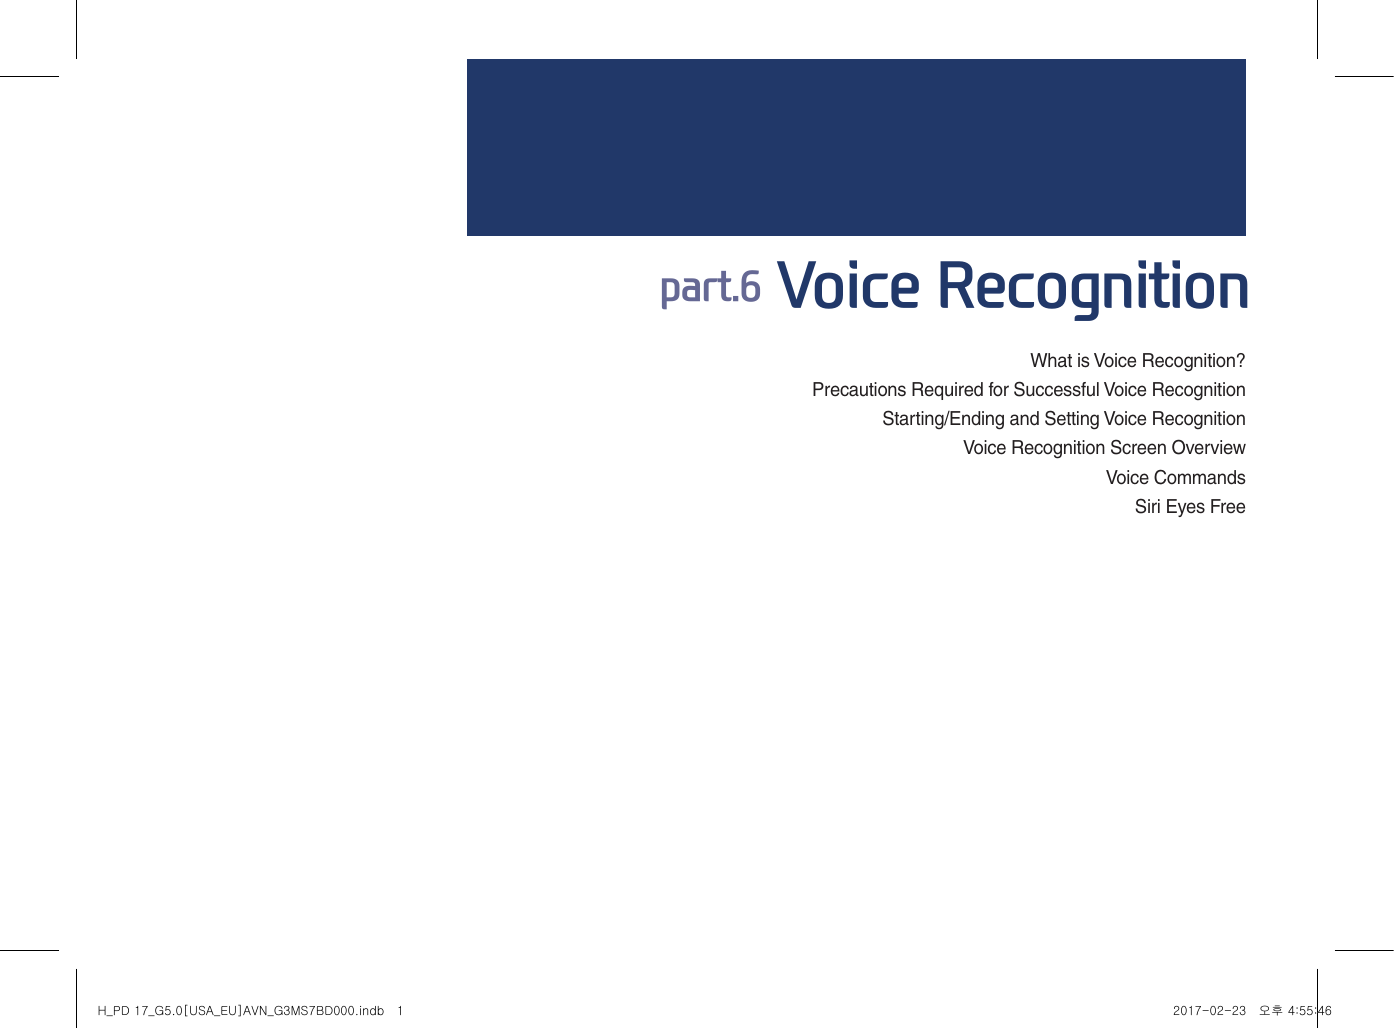 What is Voice Recognition?Precautions Required for Successful Voice RecognitionStarting/Ending and Setting Voice RecognitionVoice Recognition Screen OverviewVoice CommandsSiri Eyes Free part.6 Voice RecognitionH_PD 17_G5.0[USA_EU]AVN_G3MS7BD000.indb   1 2017-02-23   오후 4:55:46